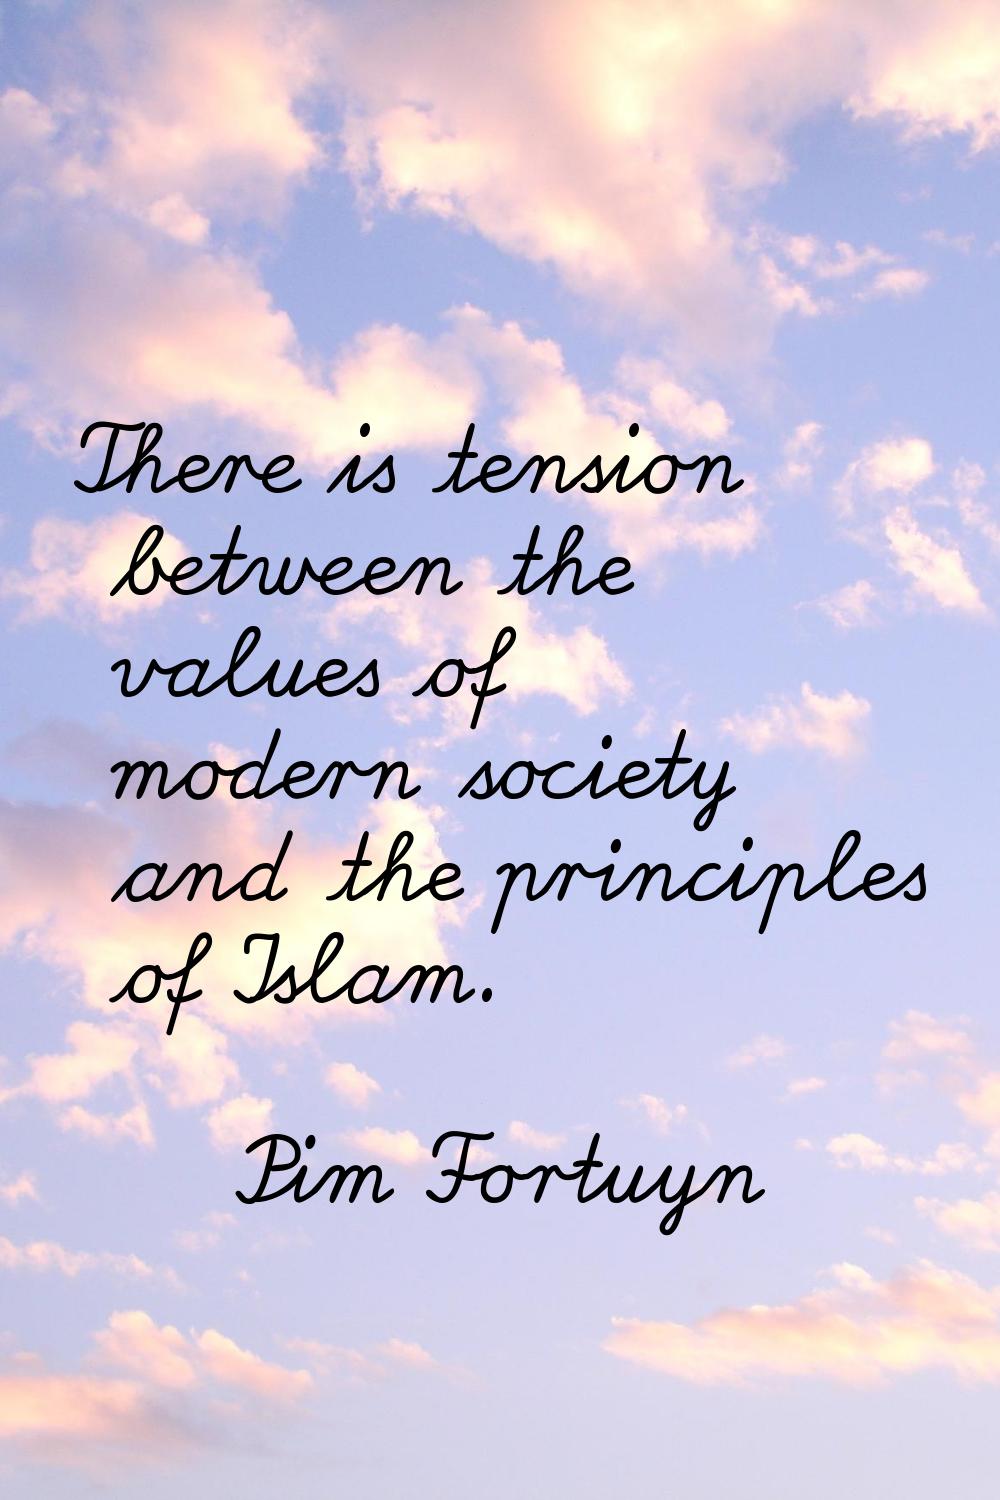 There is tension between the values of modern society and the principles of Islam.